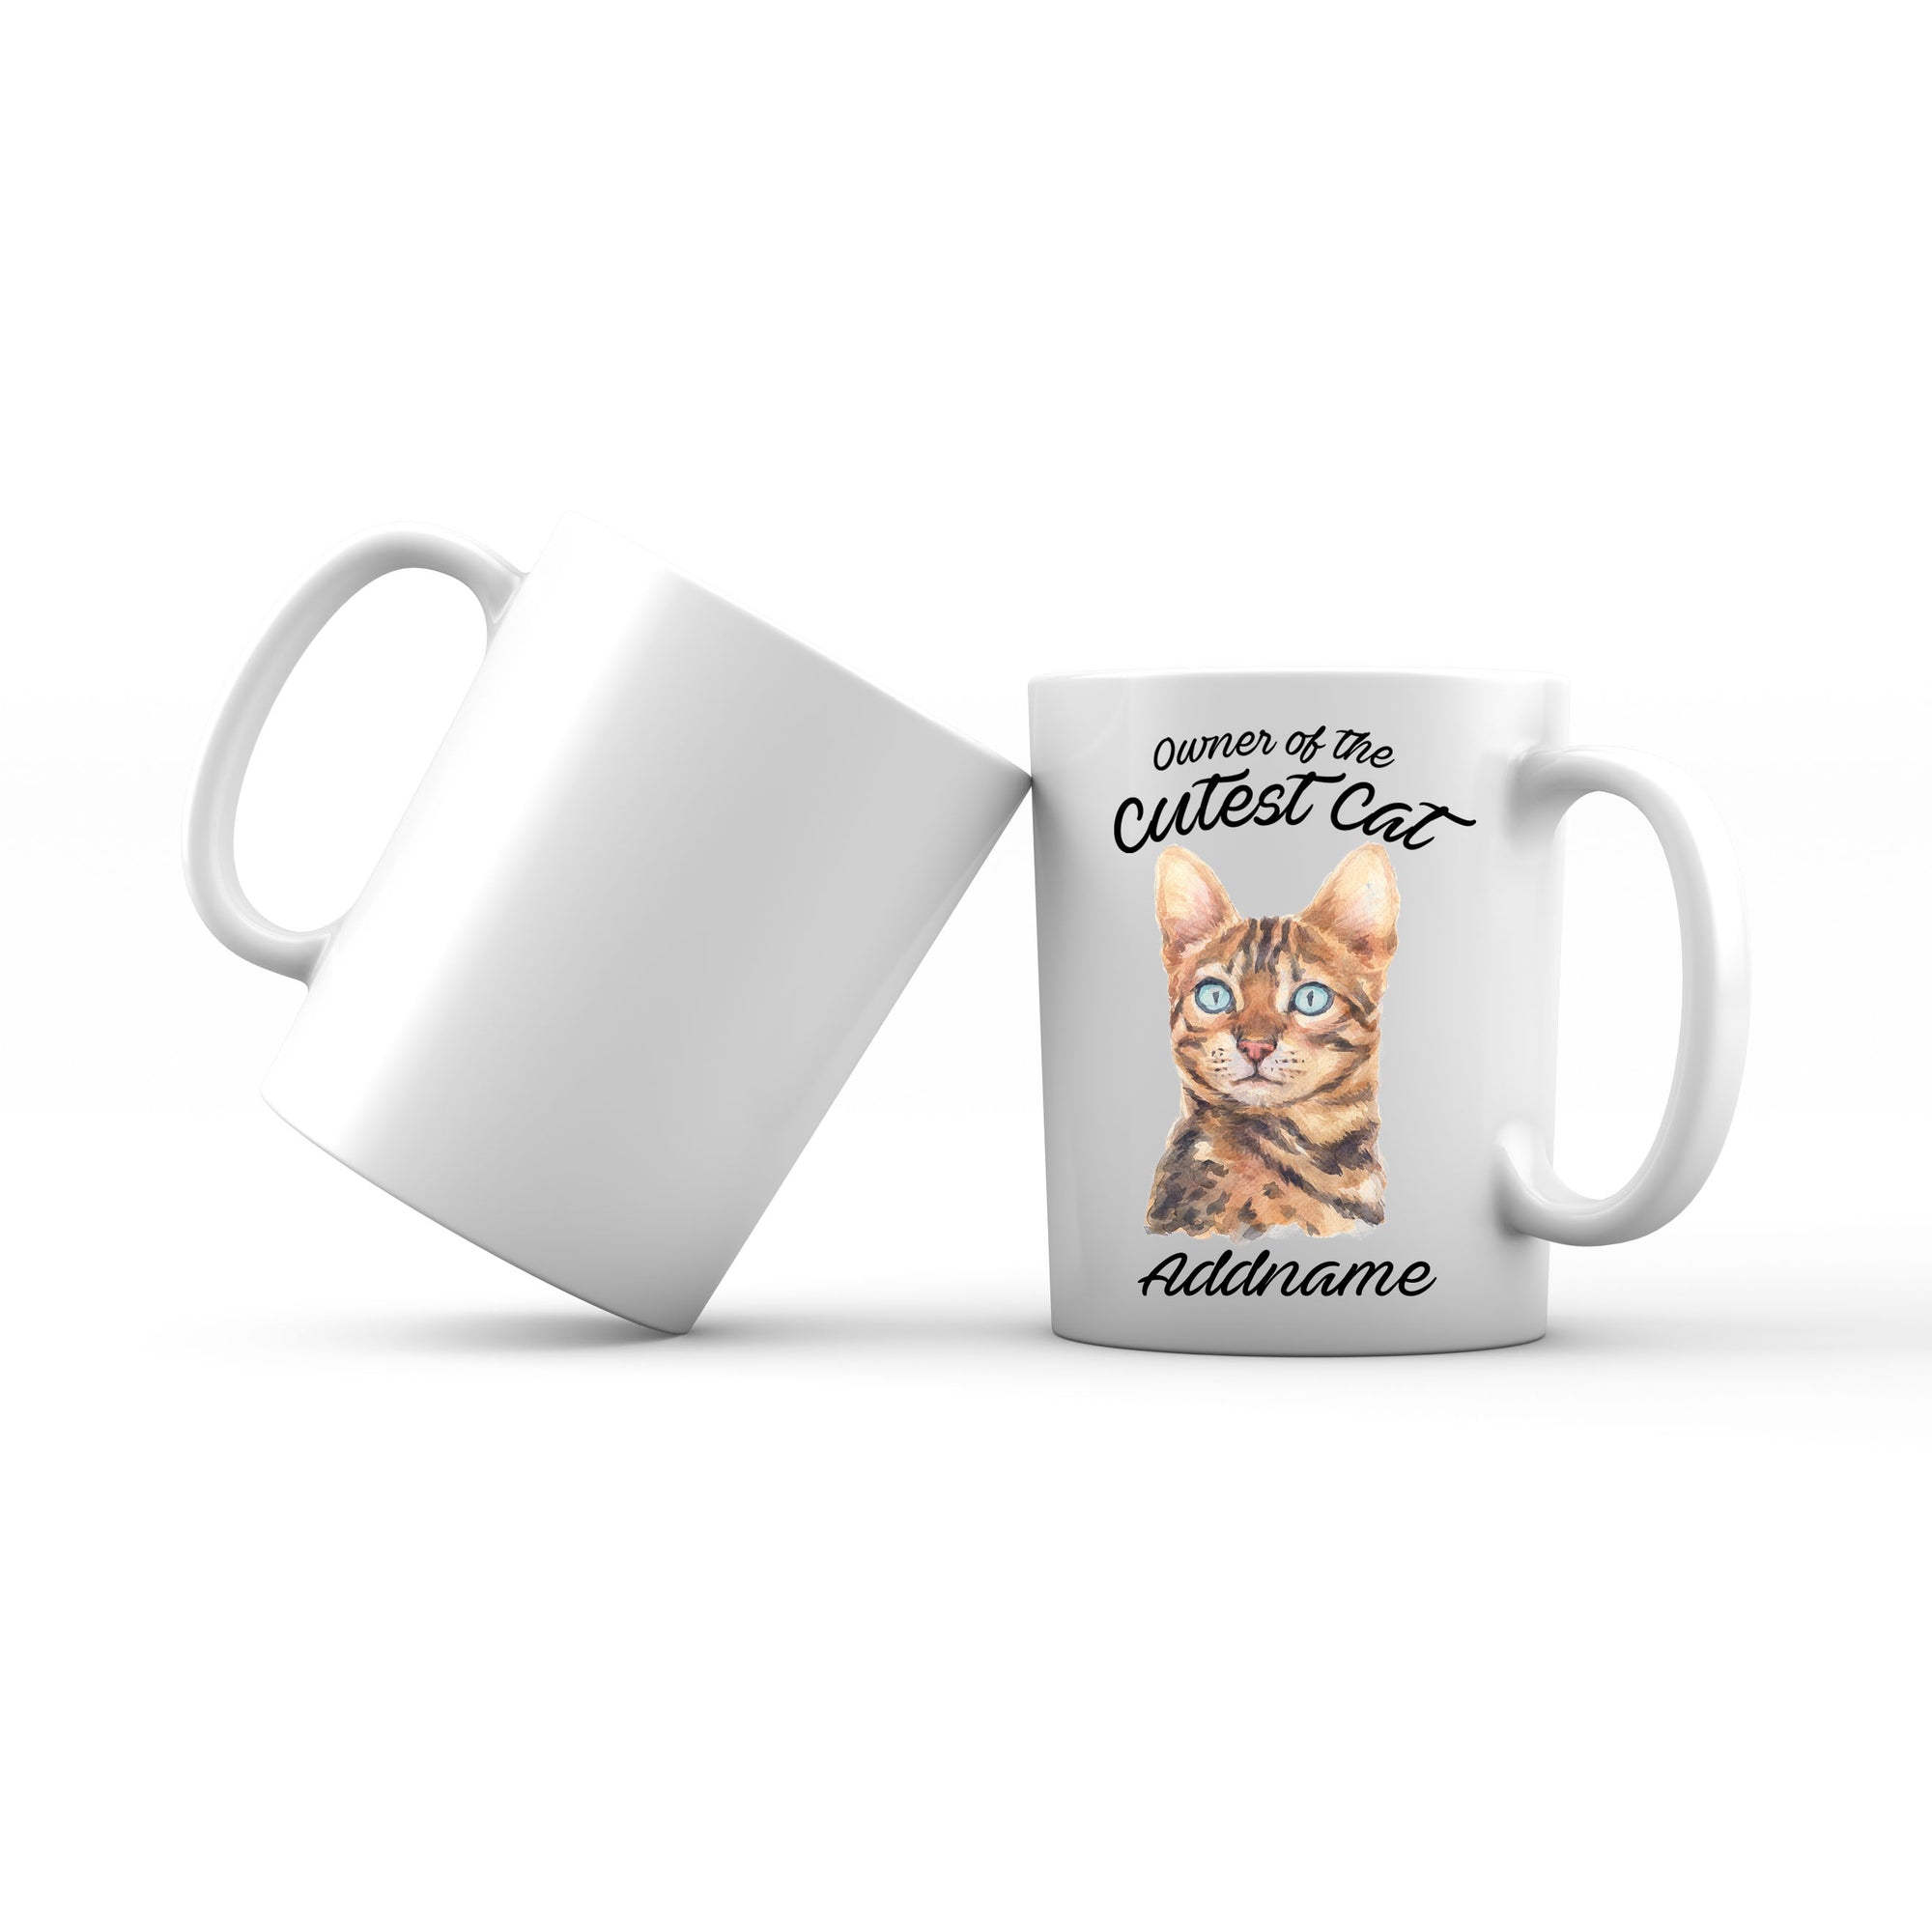 Watercolor Owner Of The Cutest Cat Bengal Addname Mug